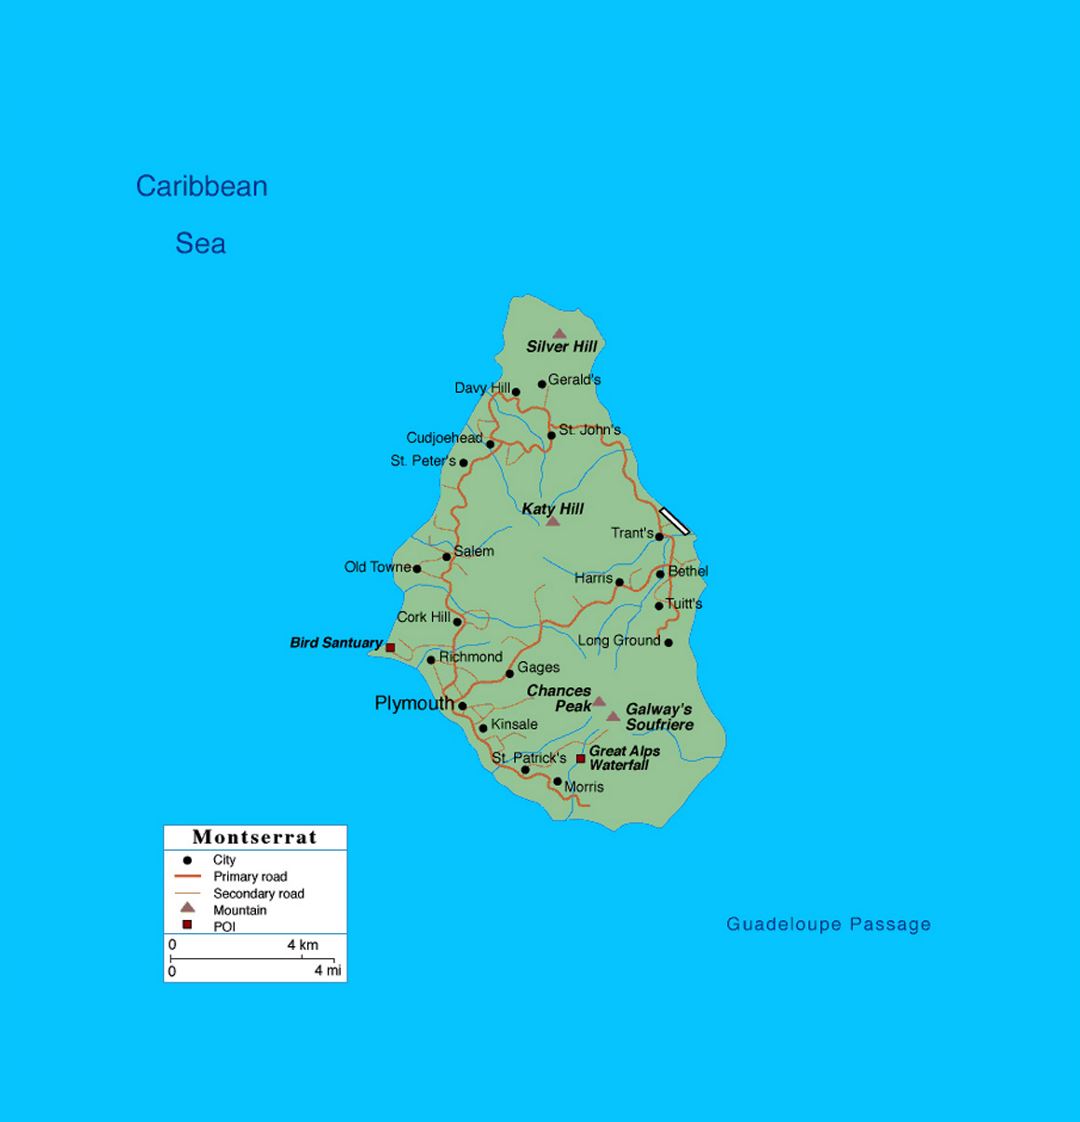 Road map of Montserrat island with cities